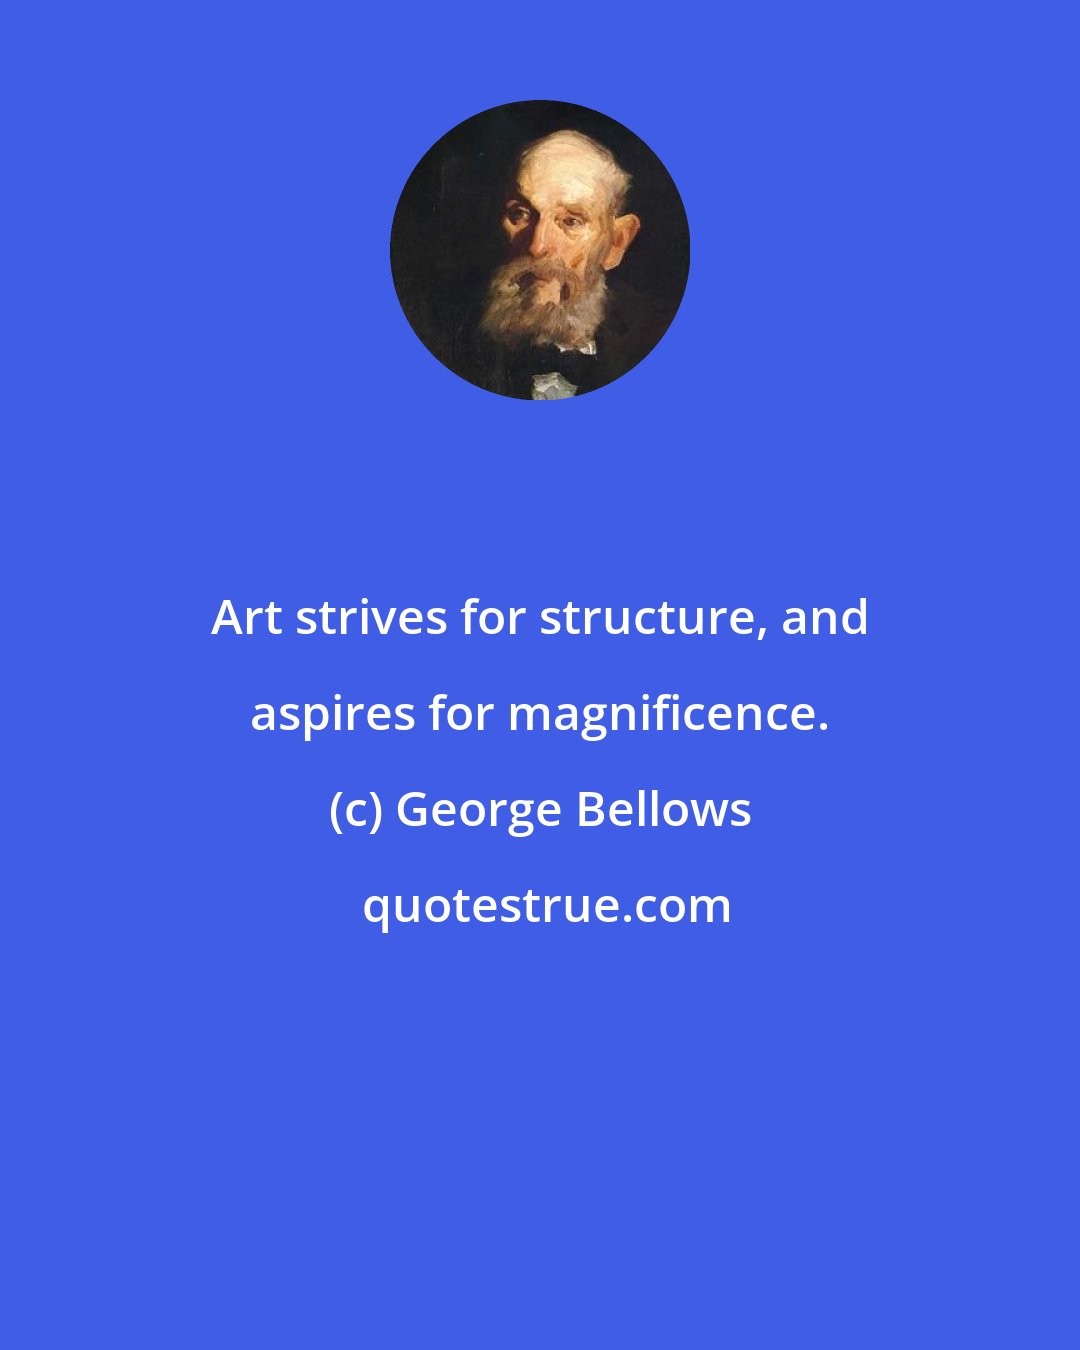 George Bellows: Art strives for structure, and aspires for magnificence.